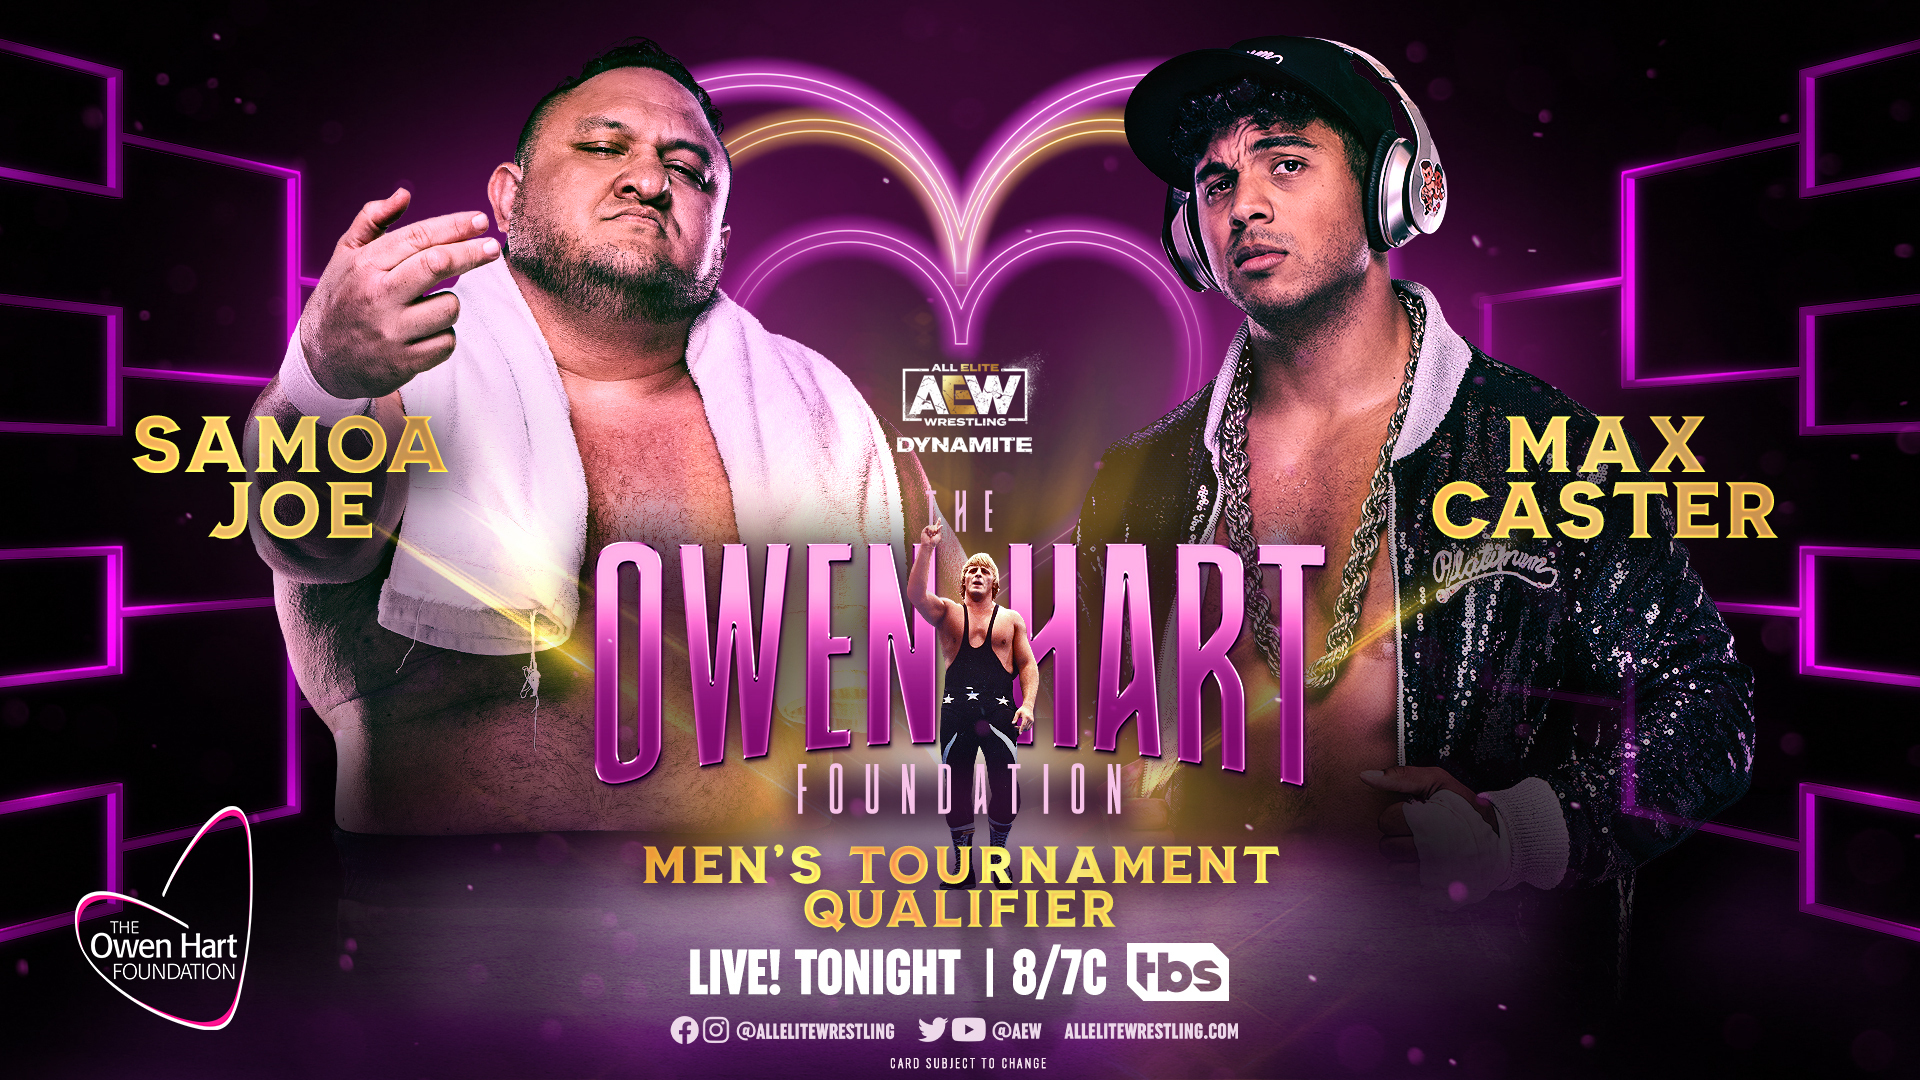 AEW and The Owen Hart Foundation Enter Into A Relationship to